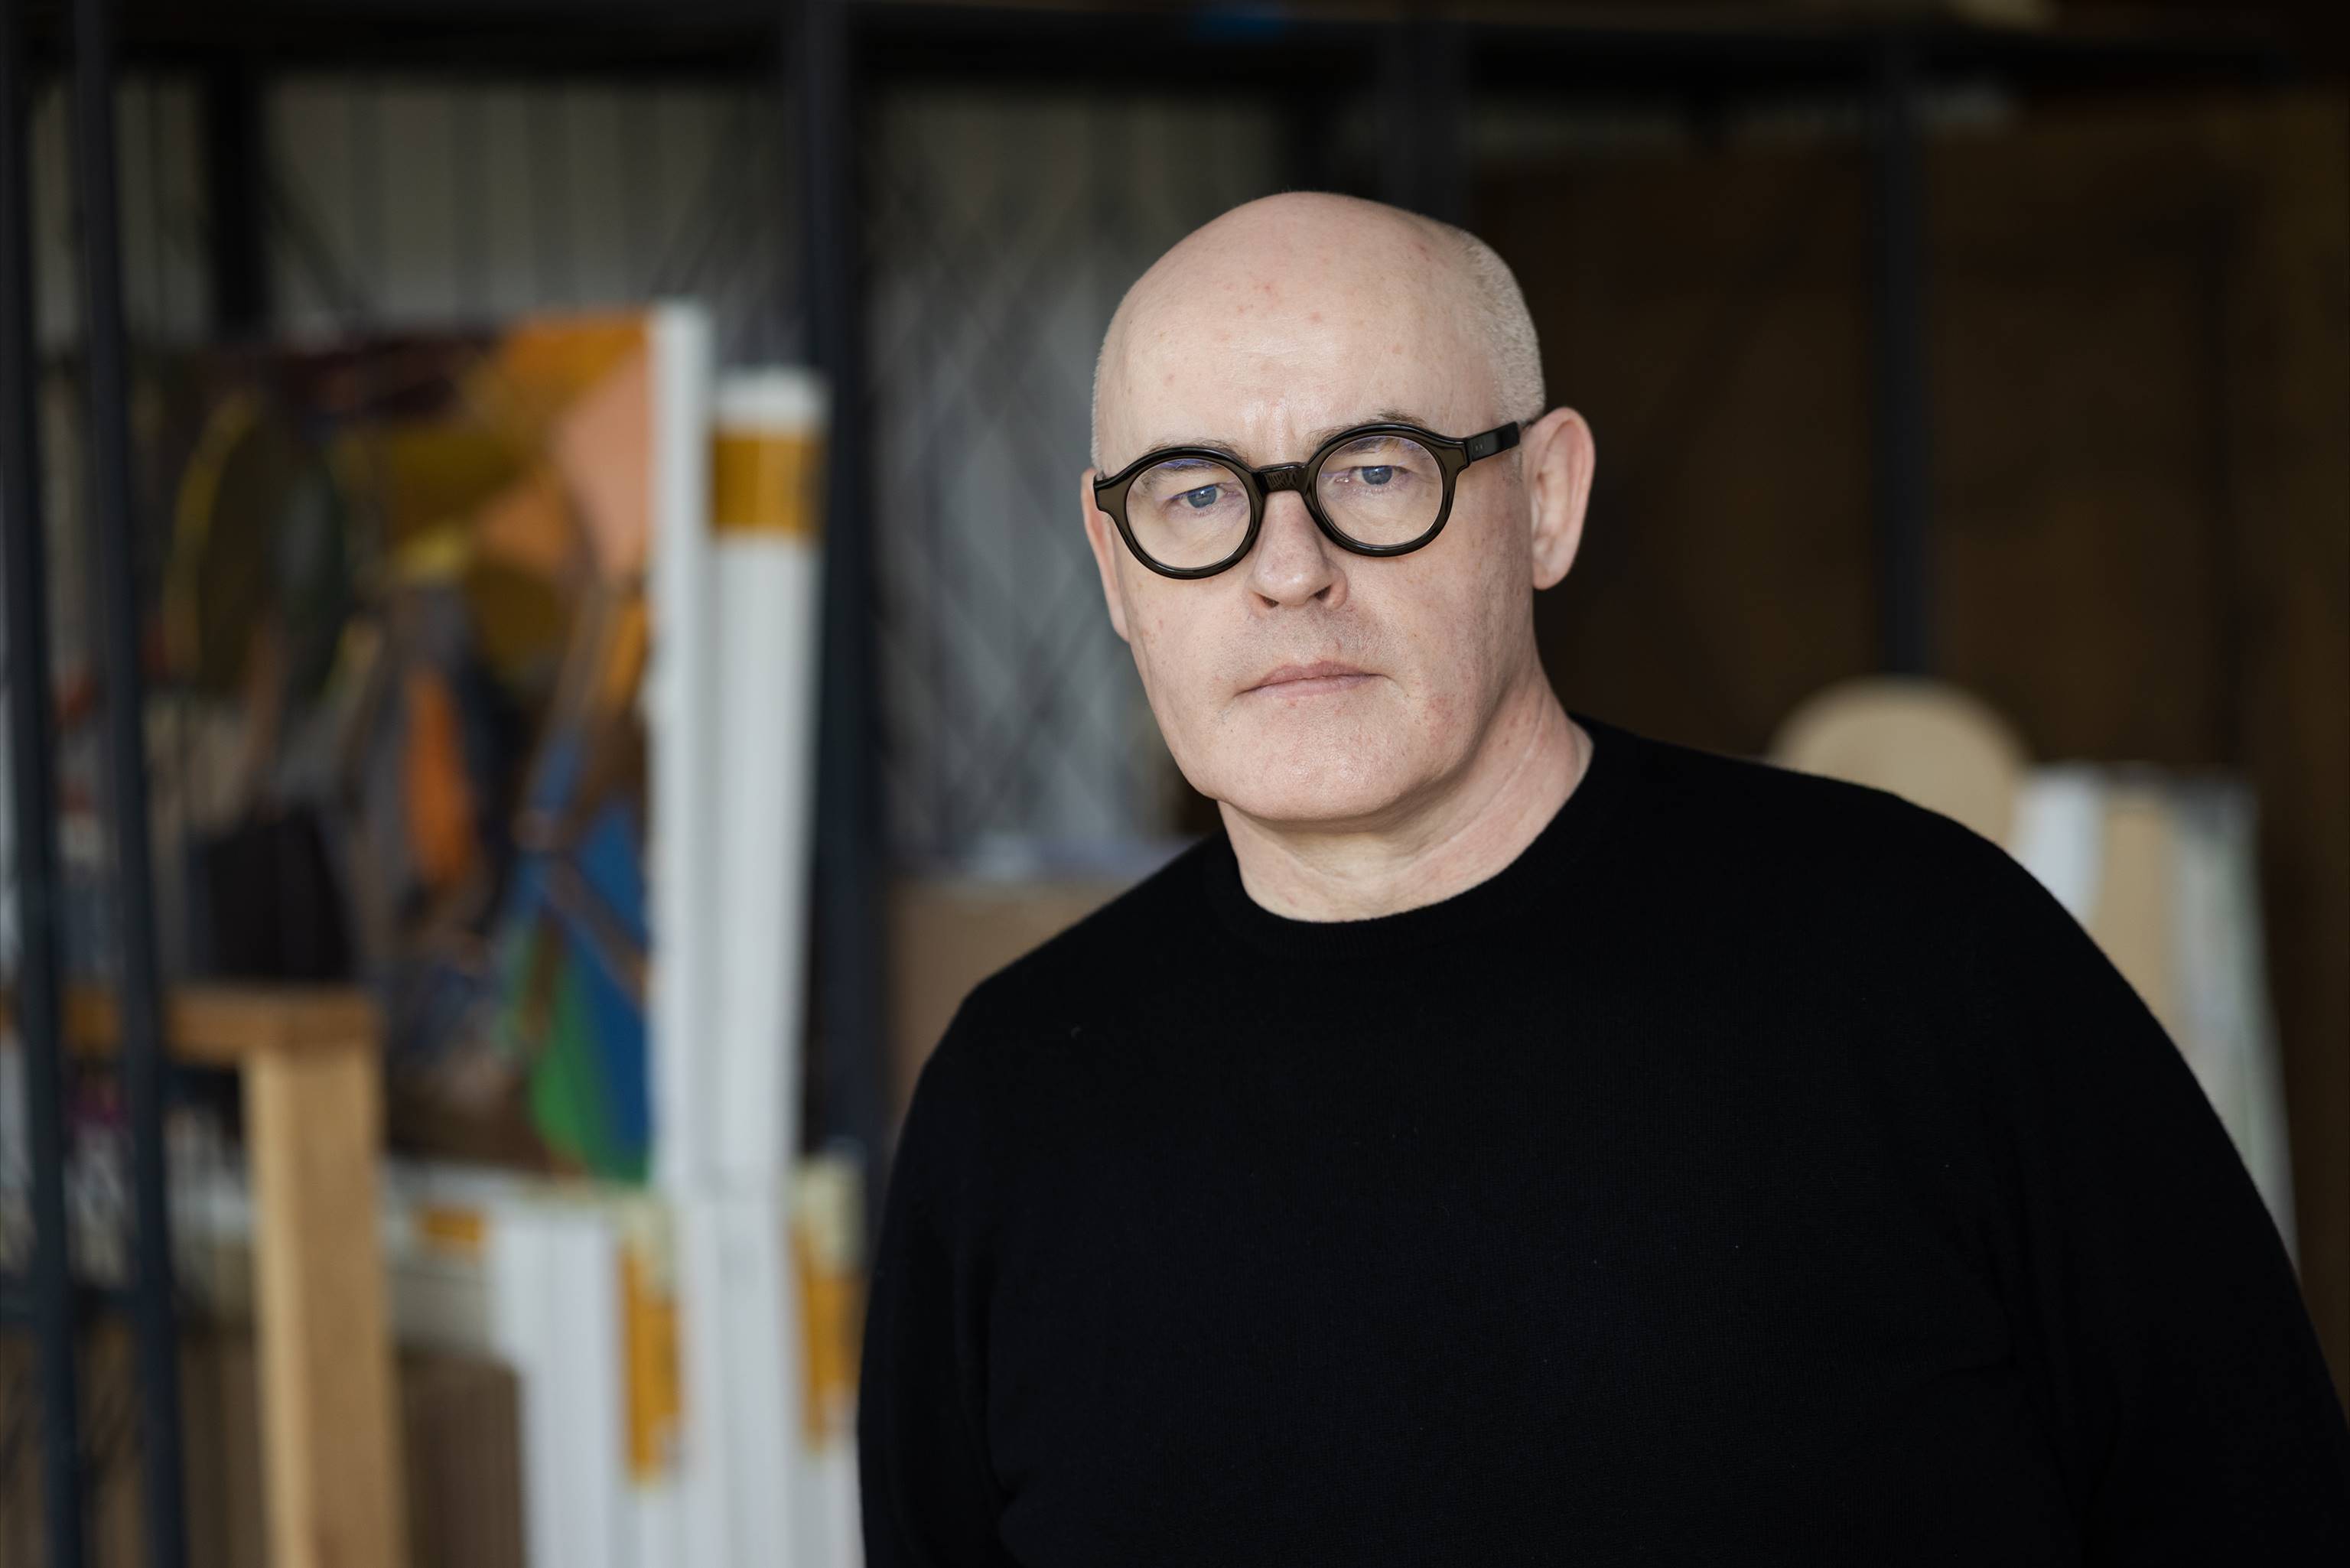 NCAD APPOINTS PROMINENT, GLOBAL ARTS EDUCATOR TO HEAD ITS SCHOOL OF EDUCATION